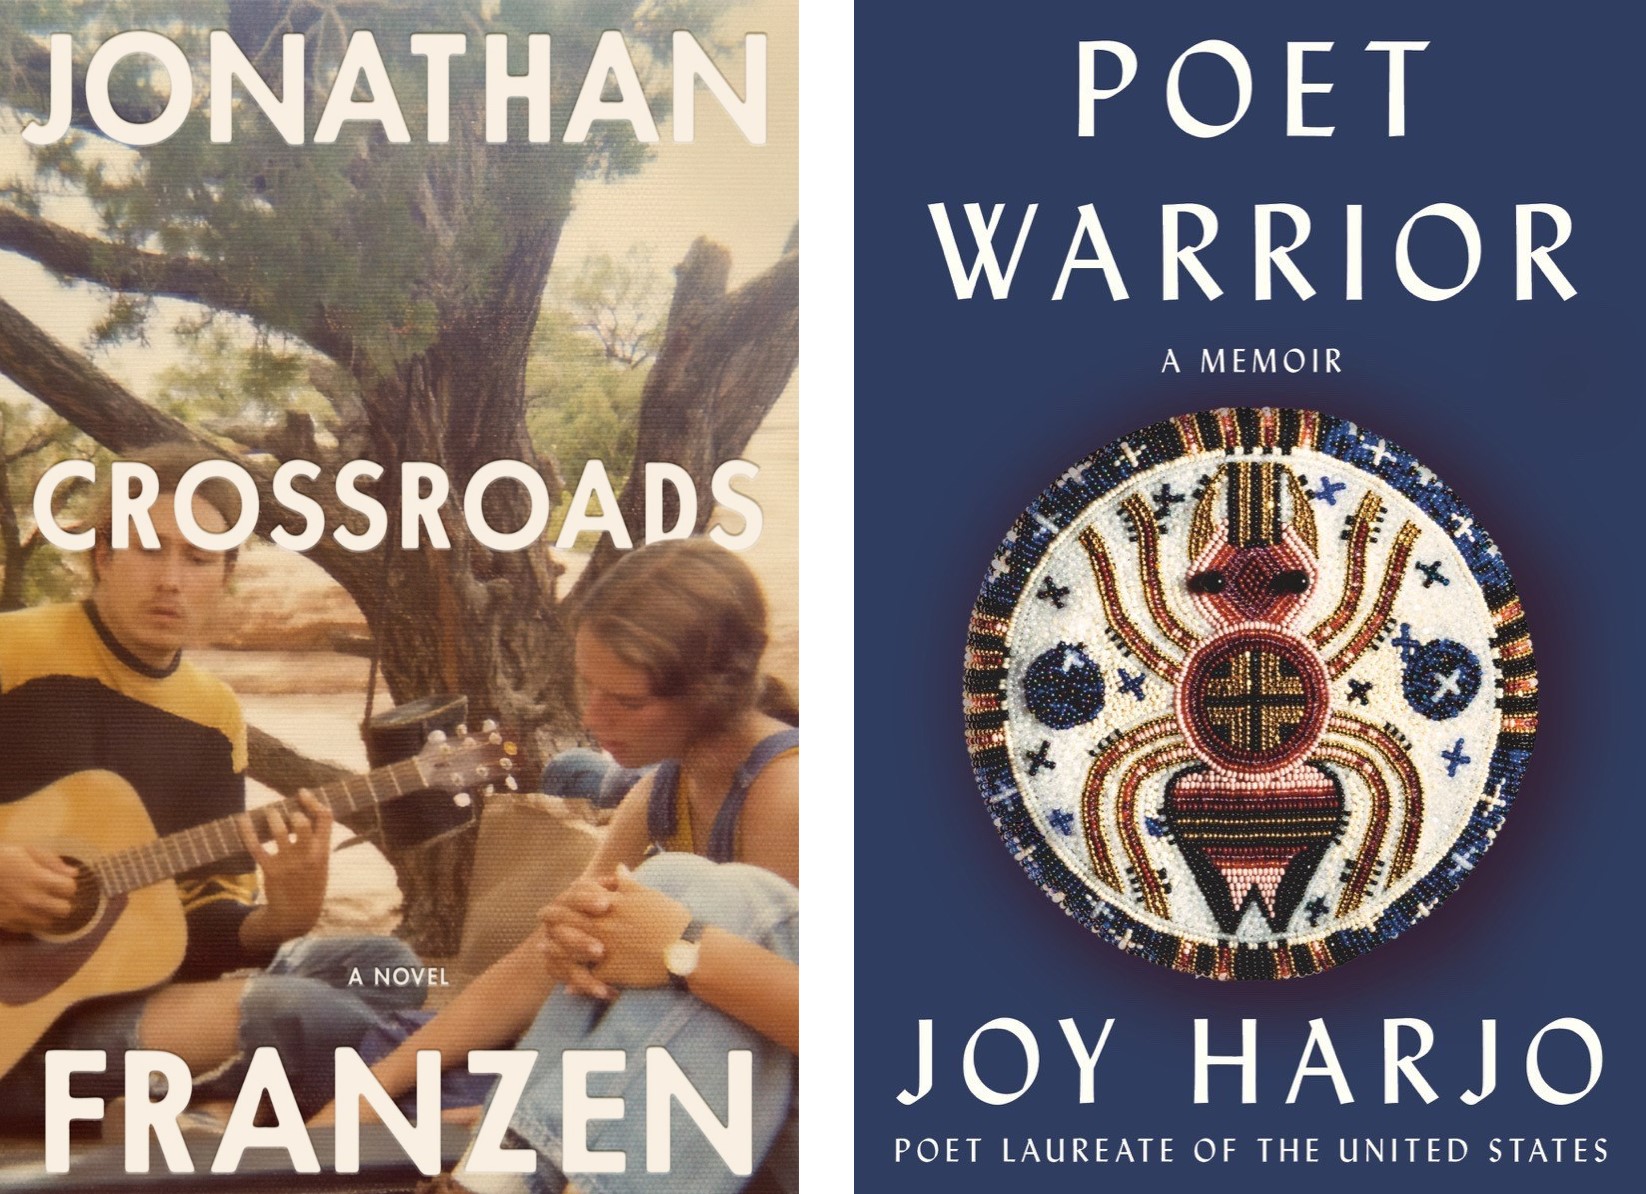 Jonathan Franzen’s ‘Crossroads,’ the Diaries of Patricia Highsmith, Joy Harjo’s Memoir ‘Poet Warrior,’ and 55 Other Exceptional Titles | Starred Reviews, September 2021